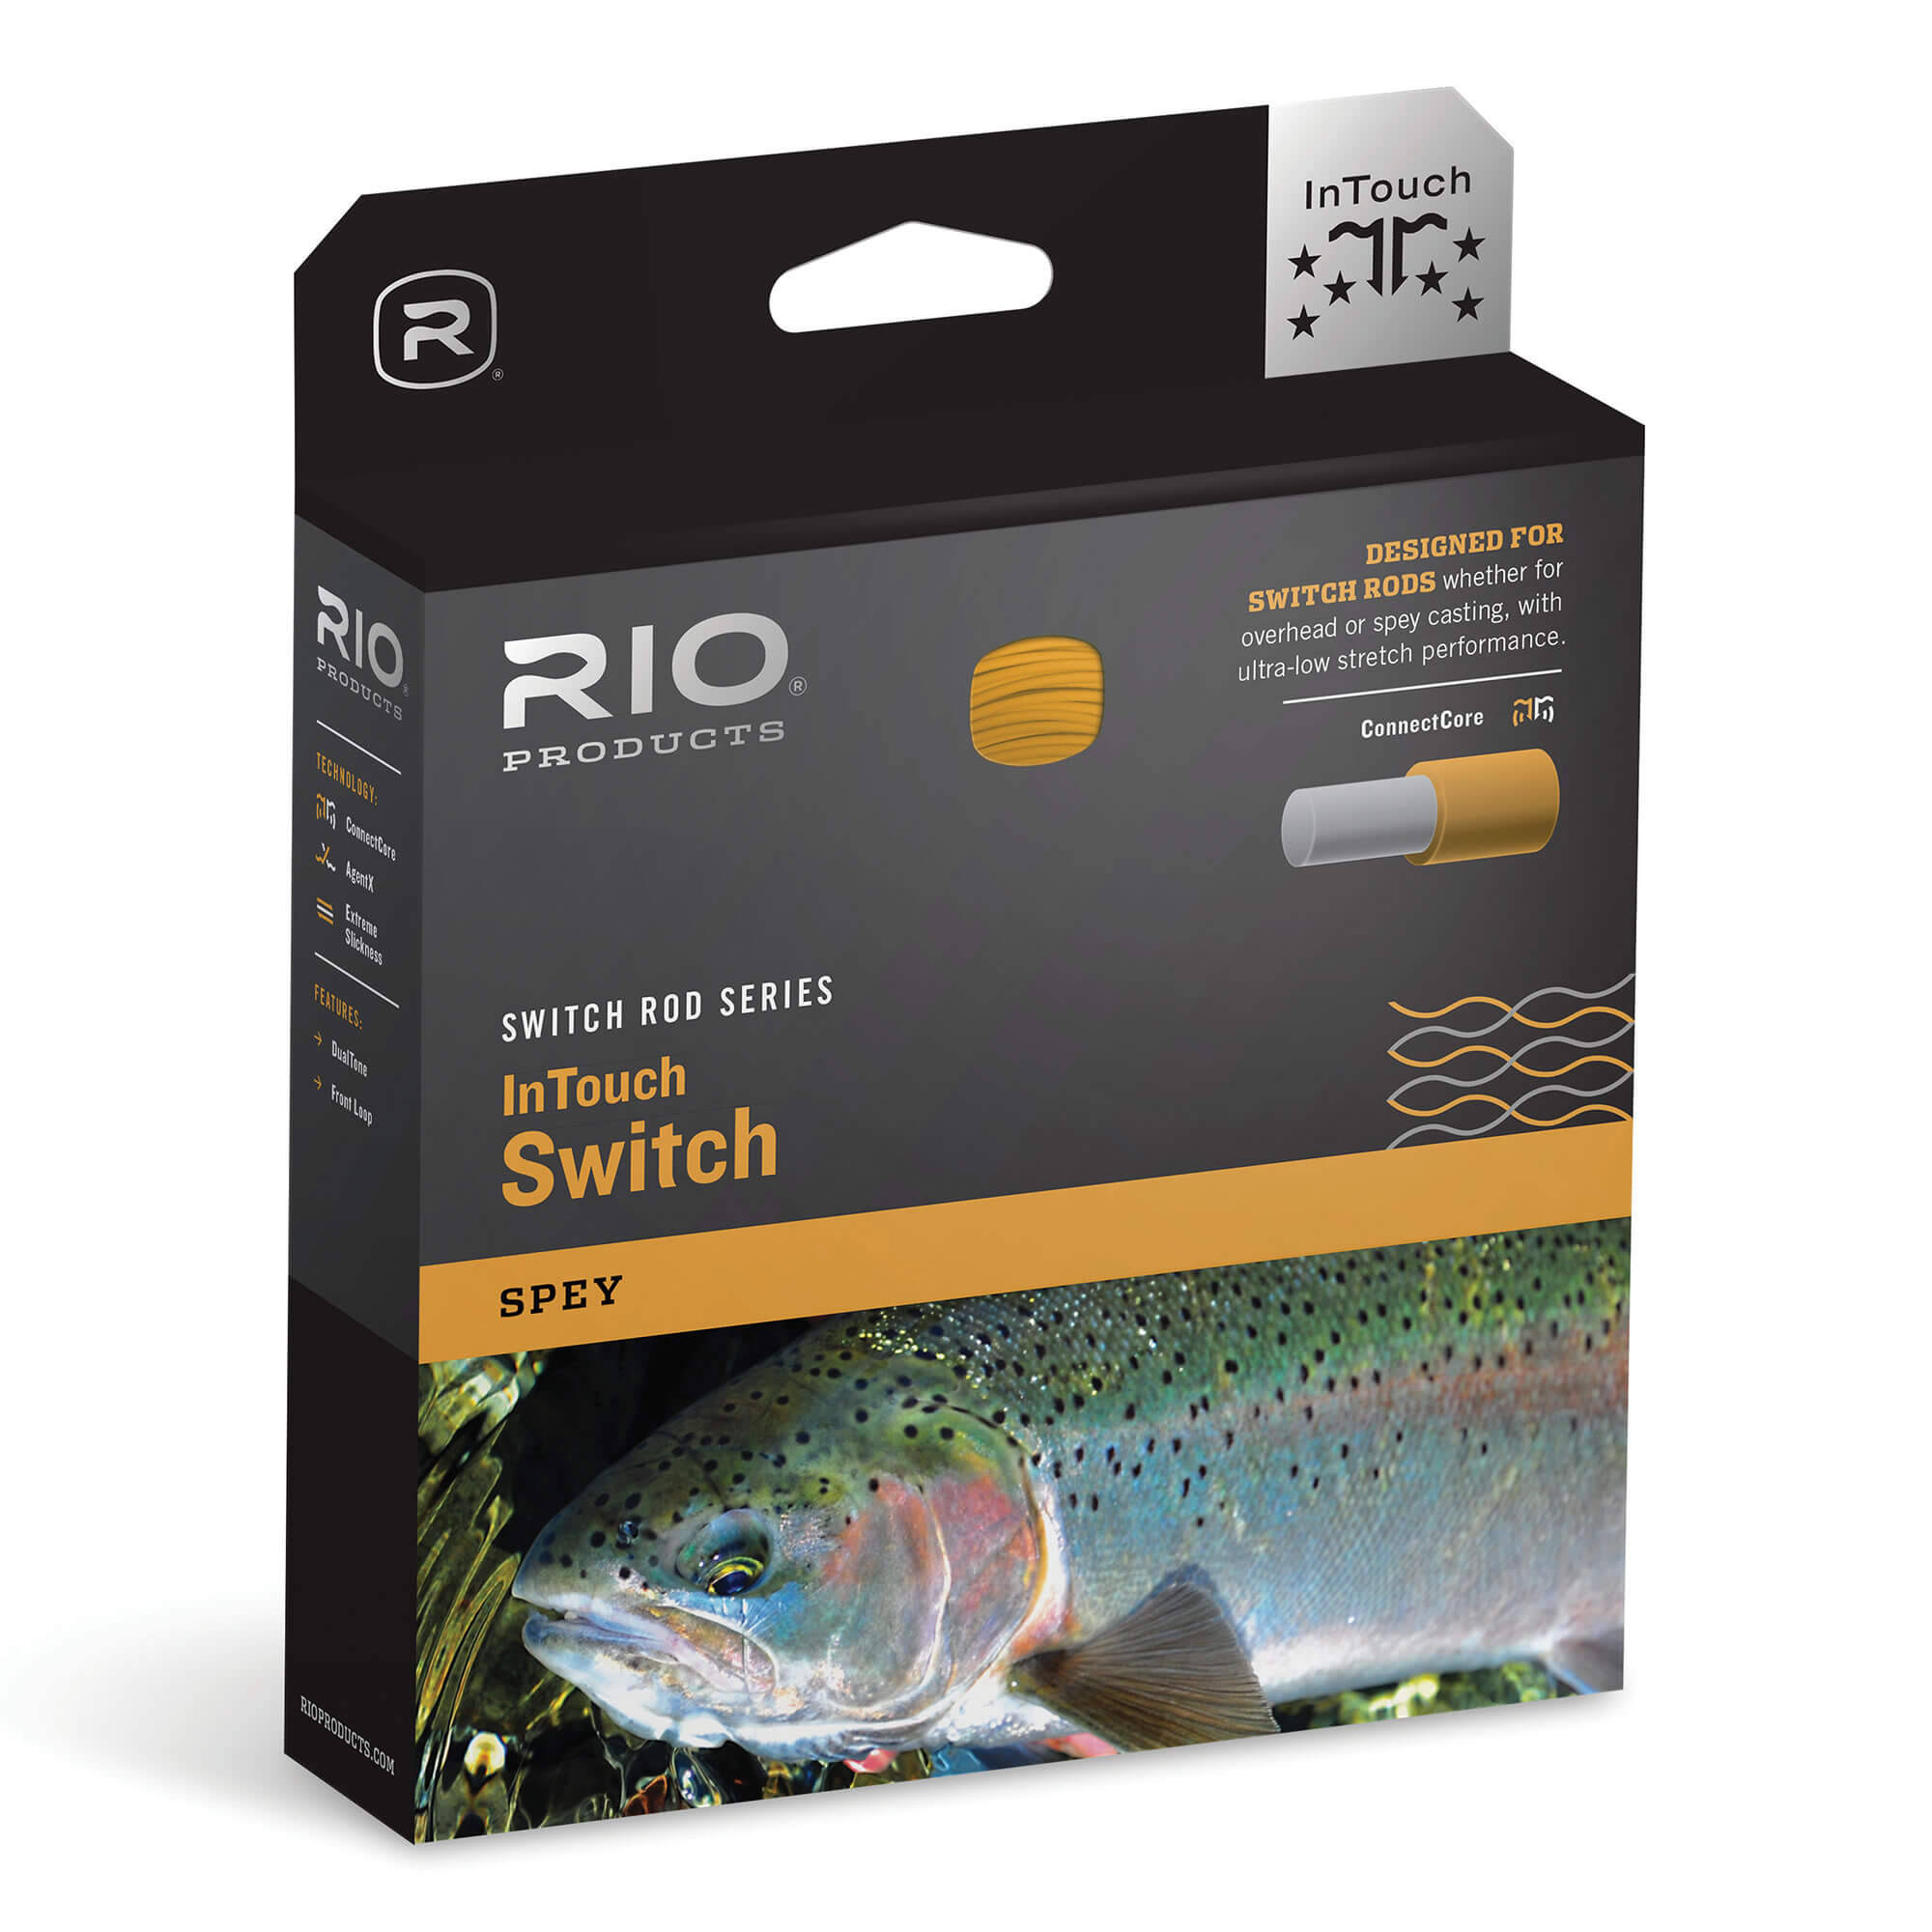 Rio InTouch Switch Fly Fishing Line - Beige/Pale Green, 100', Size 7/8F